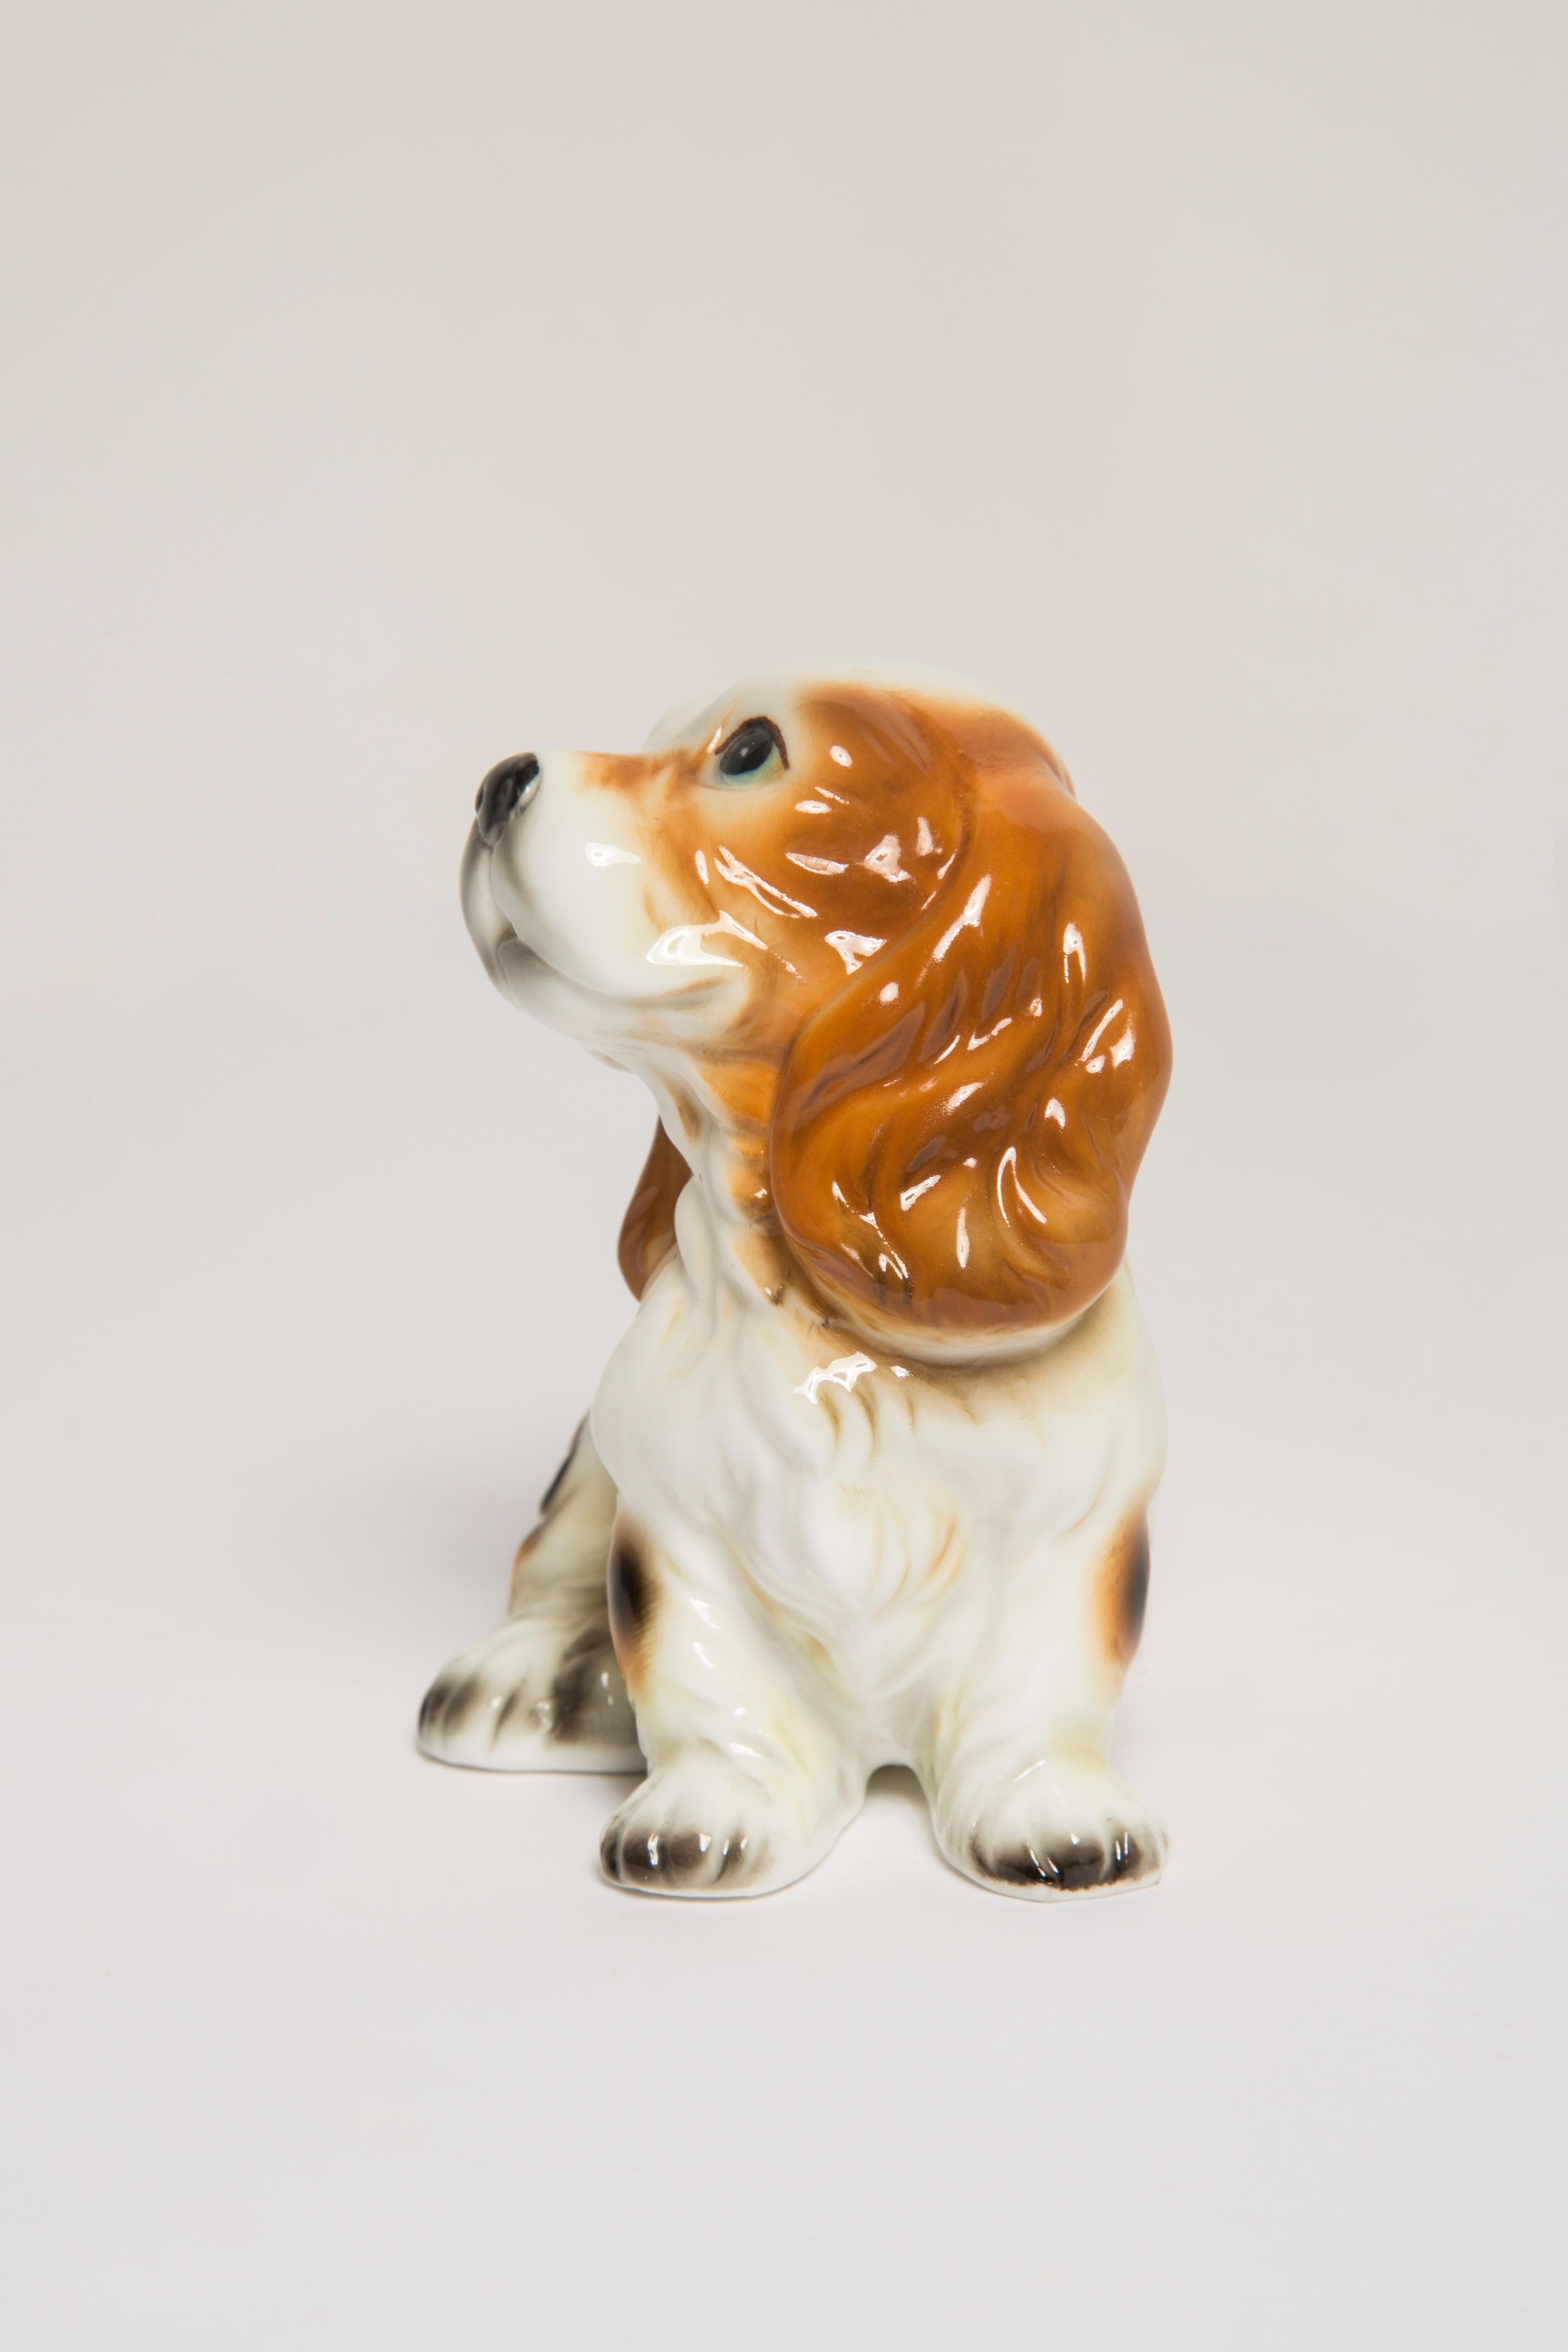 Ceramic Midcentury Small White and Red Spaniel Dog Sculpture, Taiwan, 1960s For Sale